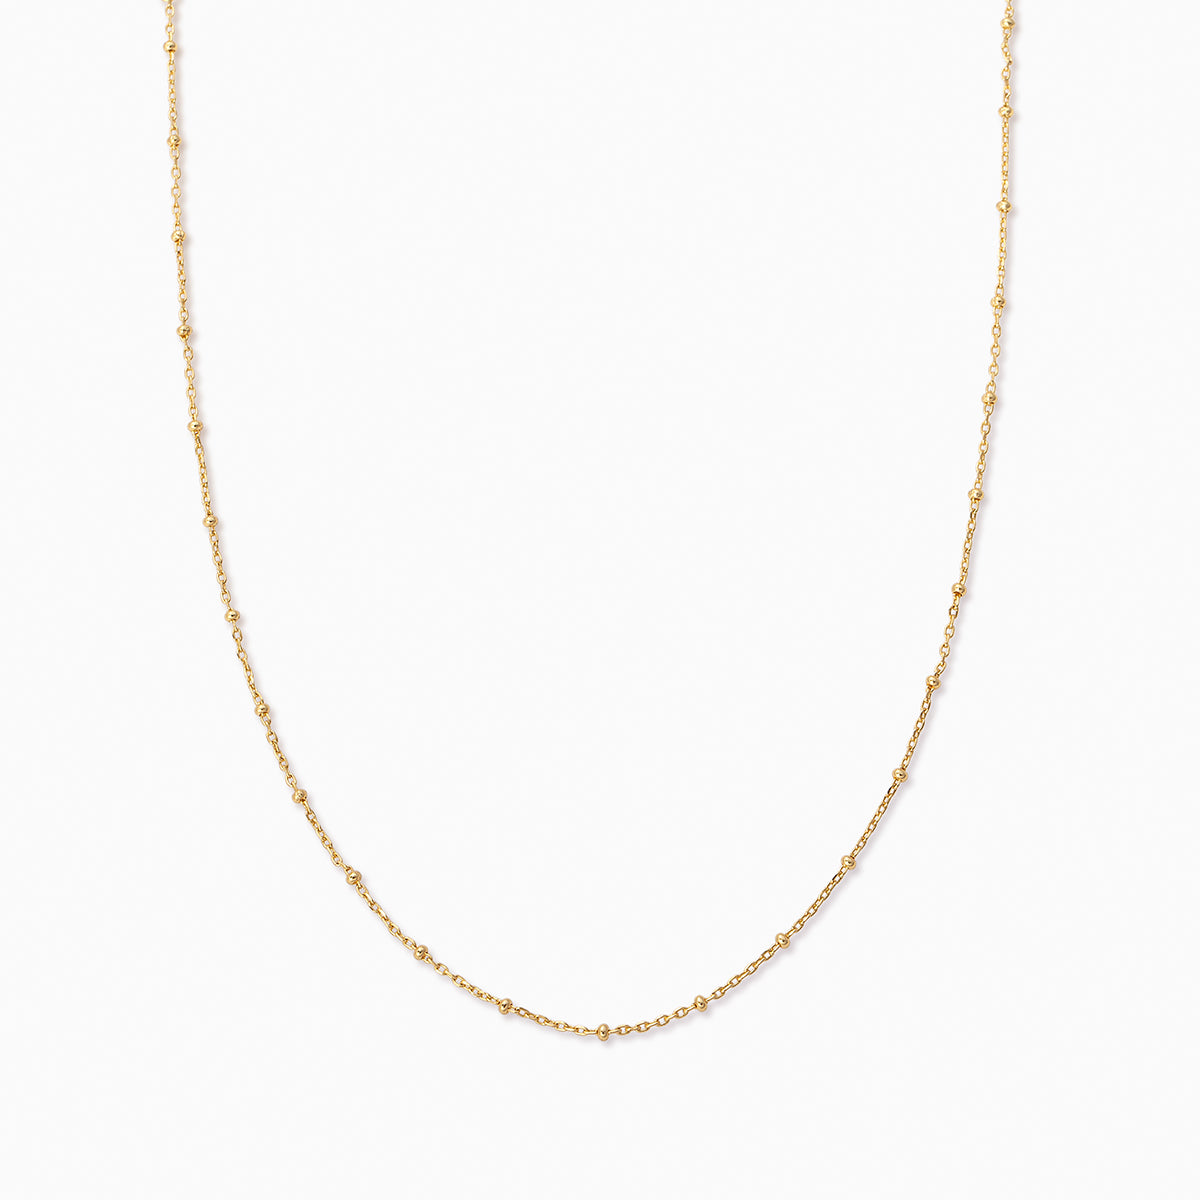 Little One Necklace | Gold | Product Image | Uncommon James